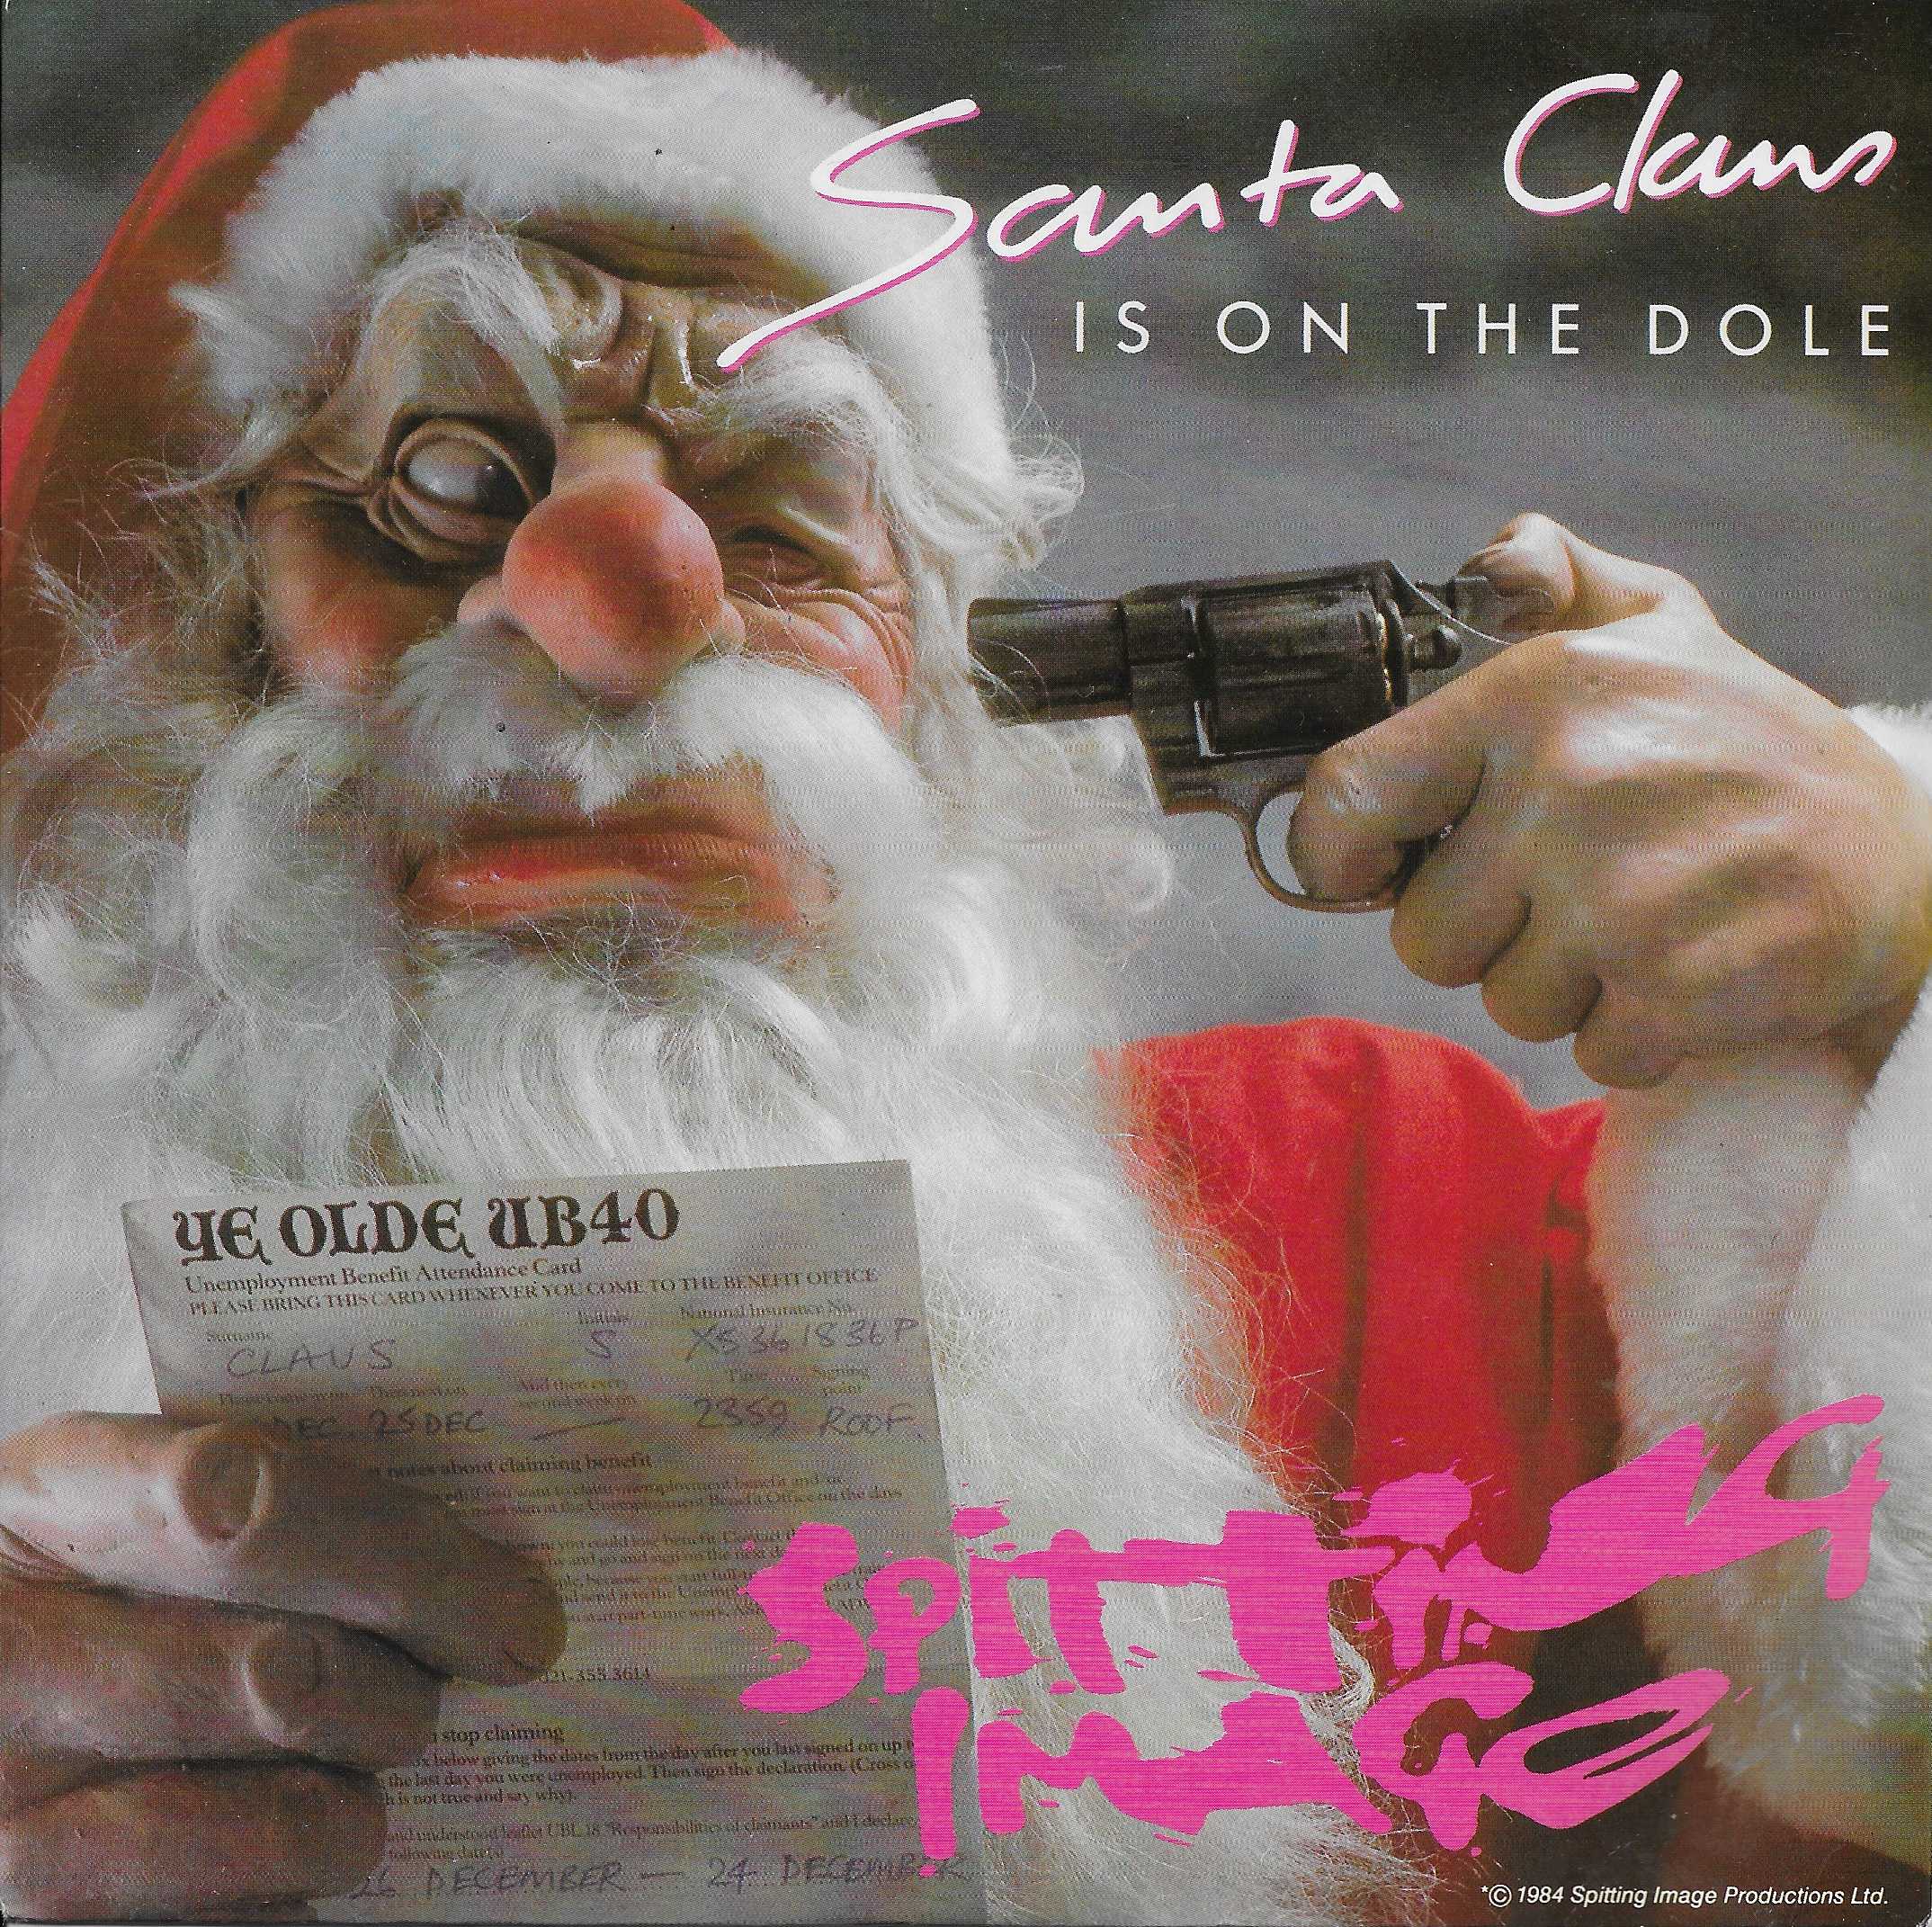 Picture of VS 921 Santa Claus is on the dole by artist Pope / Grant / Naylor